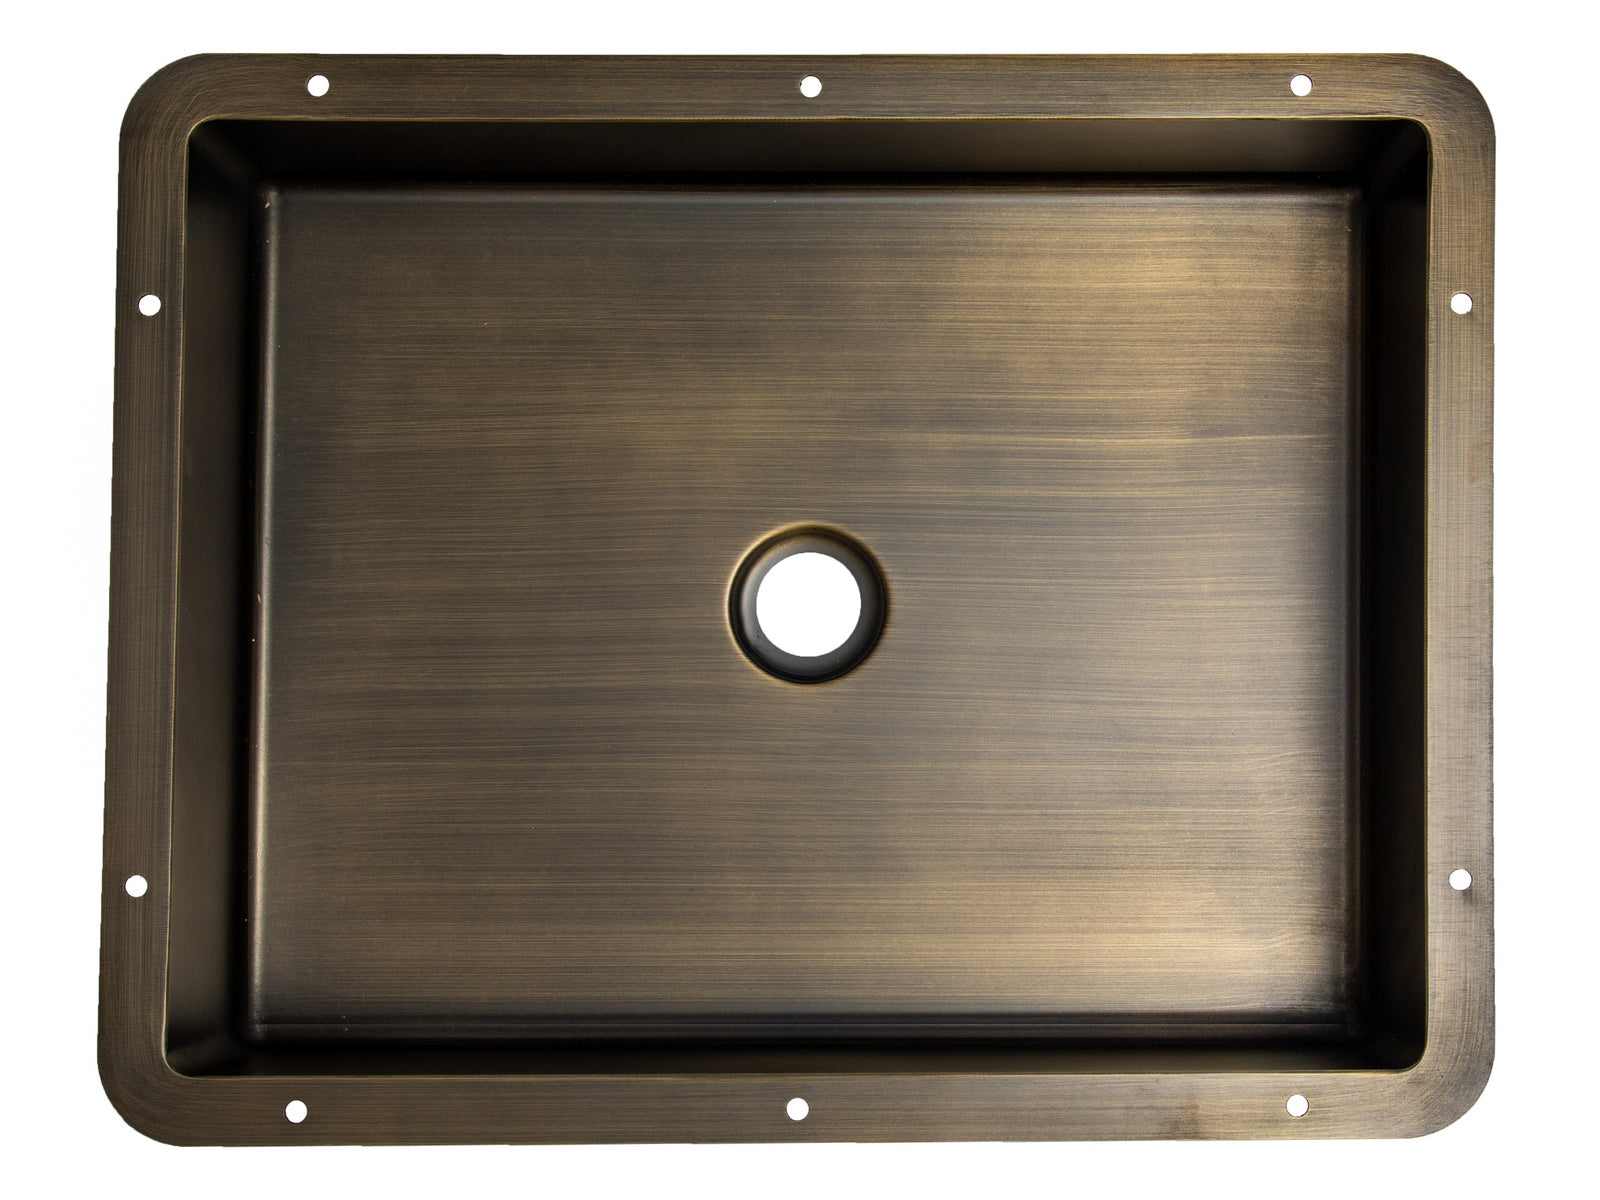 Rectangular 20' x 16" Undermount Stainless Steel Bathroom Sink and Drain in Antique Gold